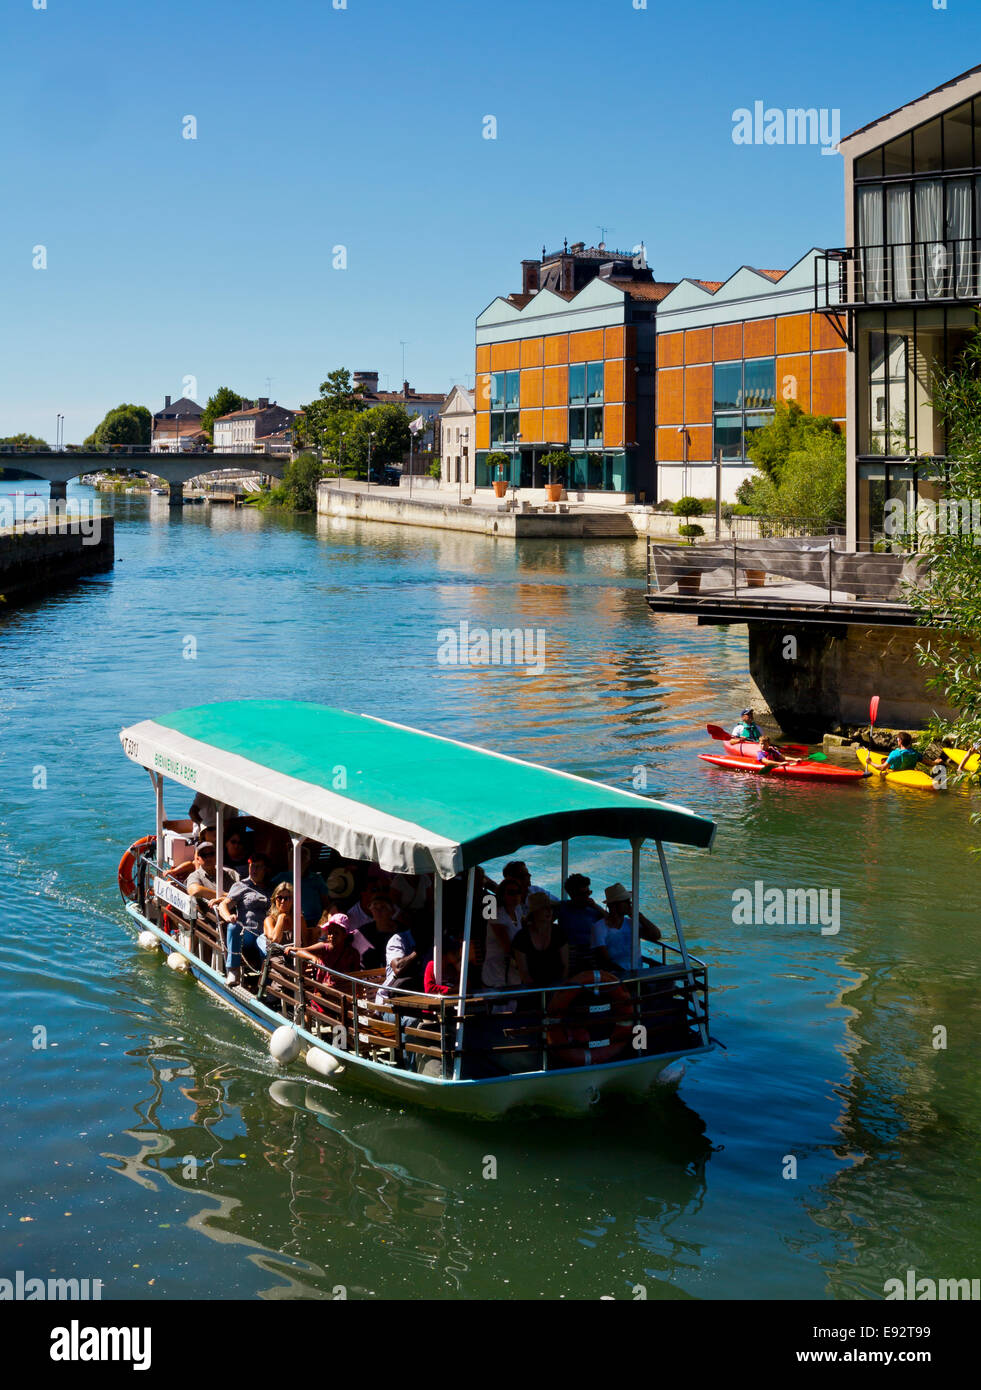 River boat carrying tourists on the River Charente flowing through Jarnac in the Charente Region of south west France Stock Photo